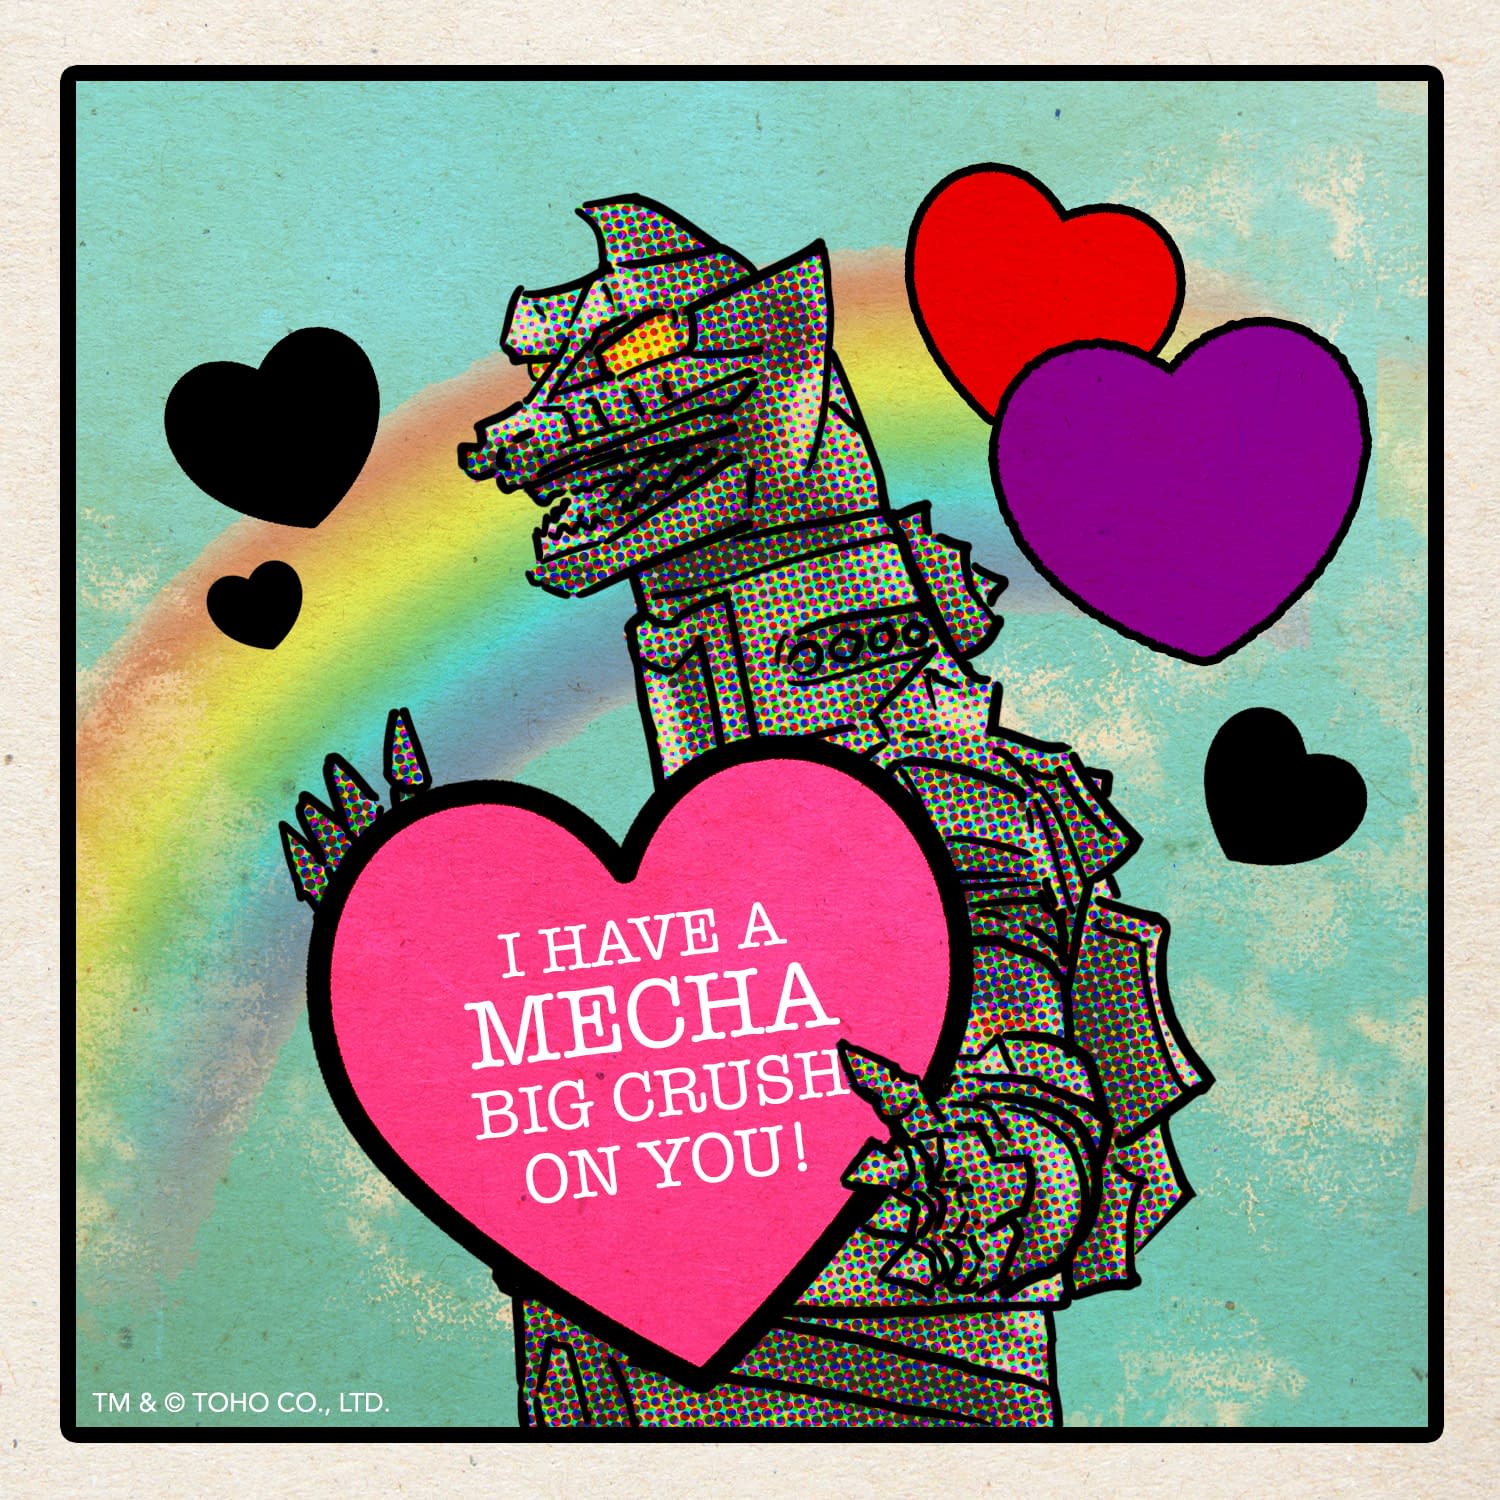 Tell Them You Love Them With A Godzilla Valentine's Day Card